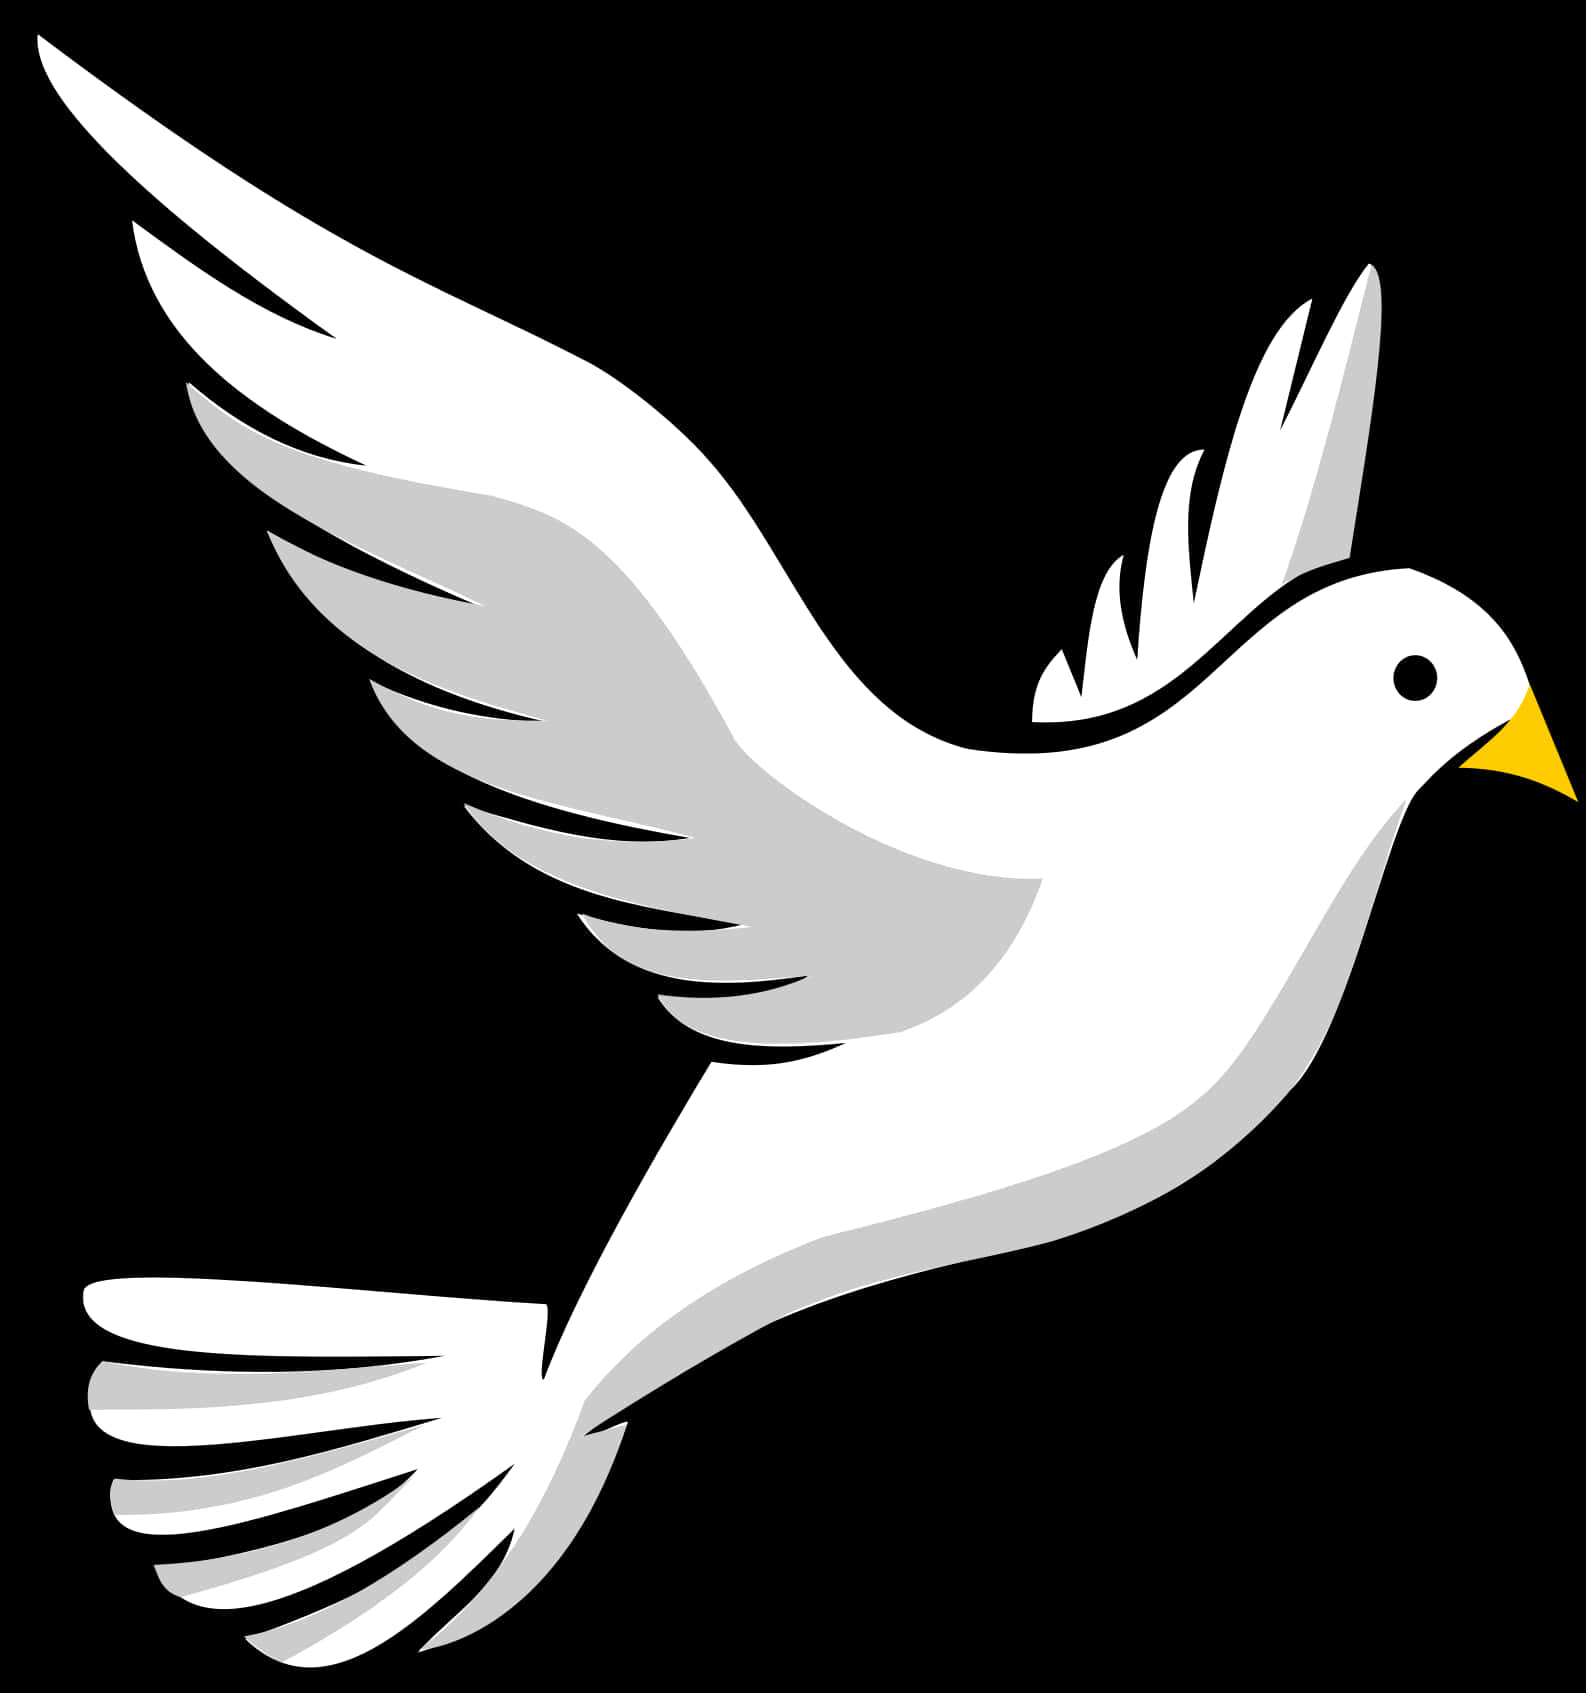 A White Bird With Yellow Beak And Wings